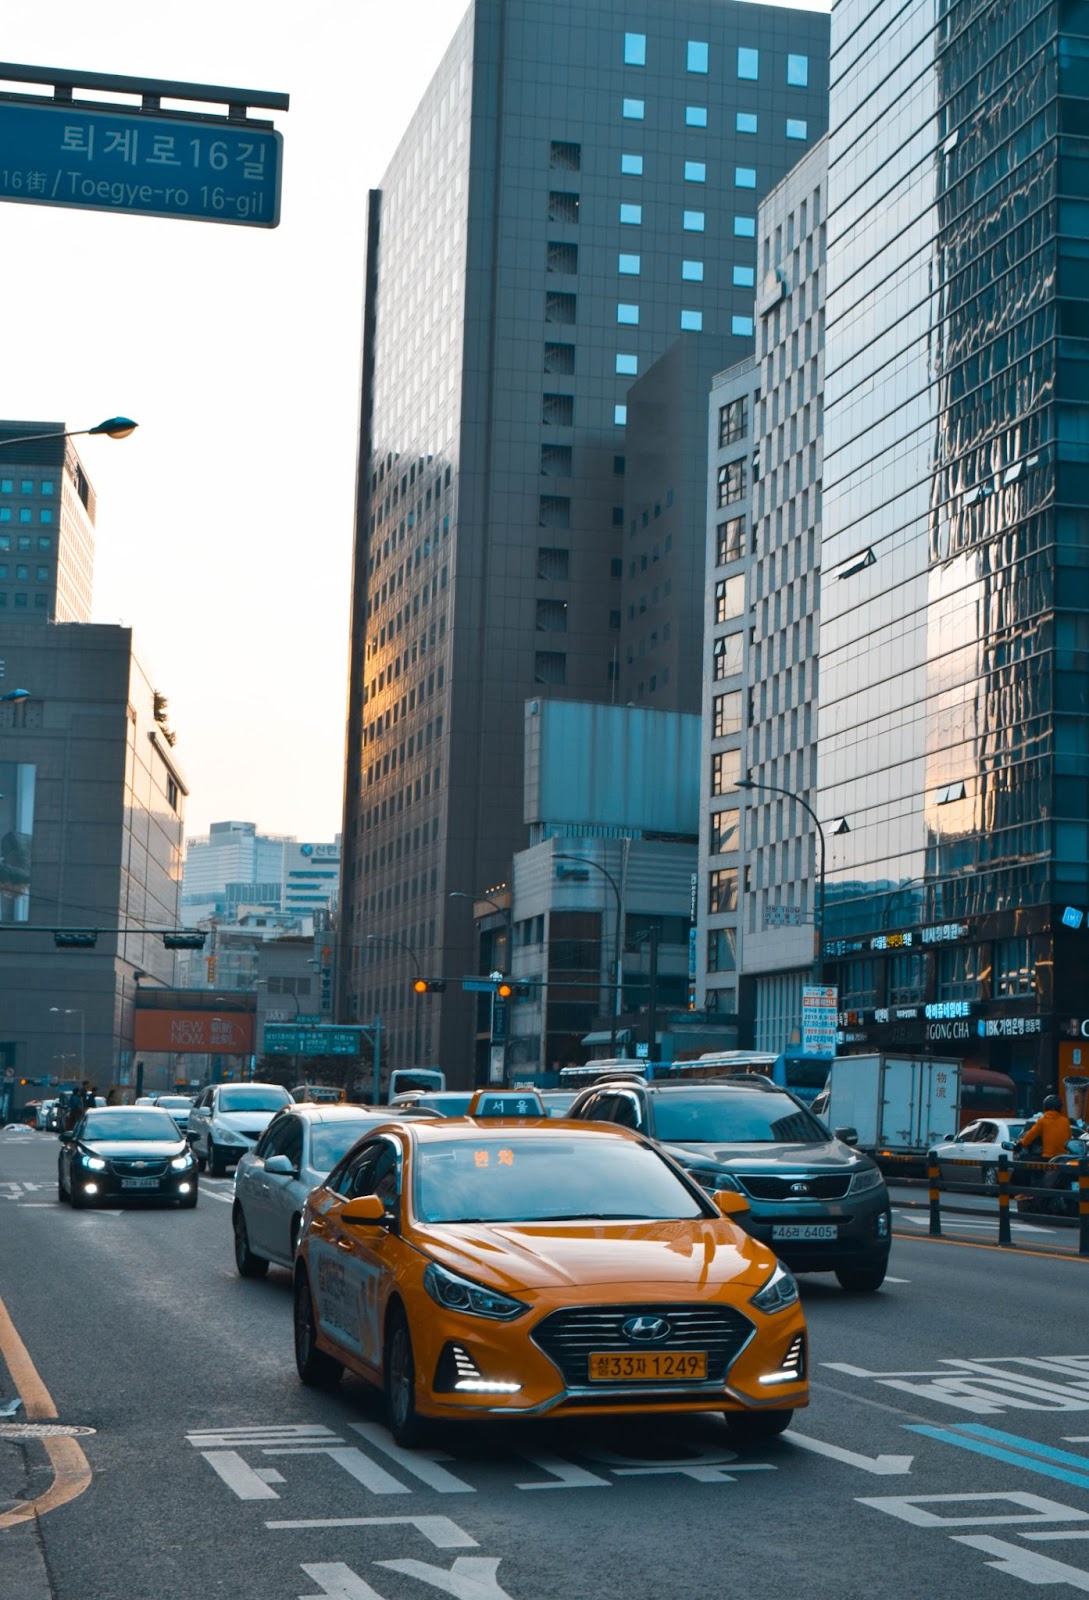 An image of an orange taxi on the streets of Seoul.